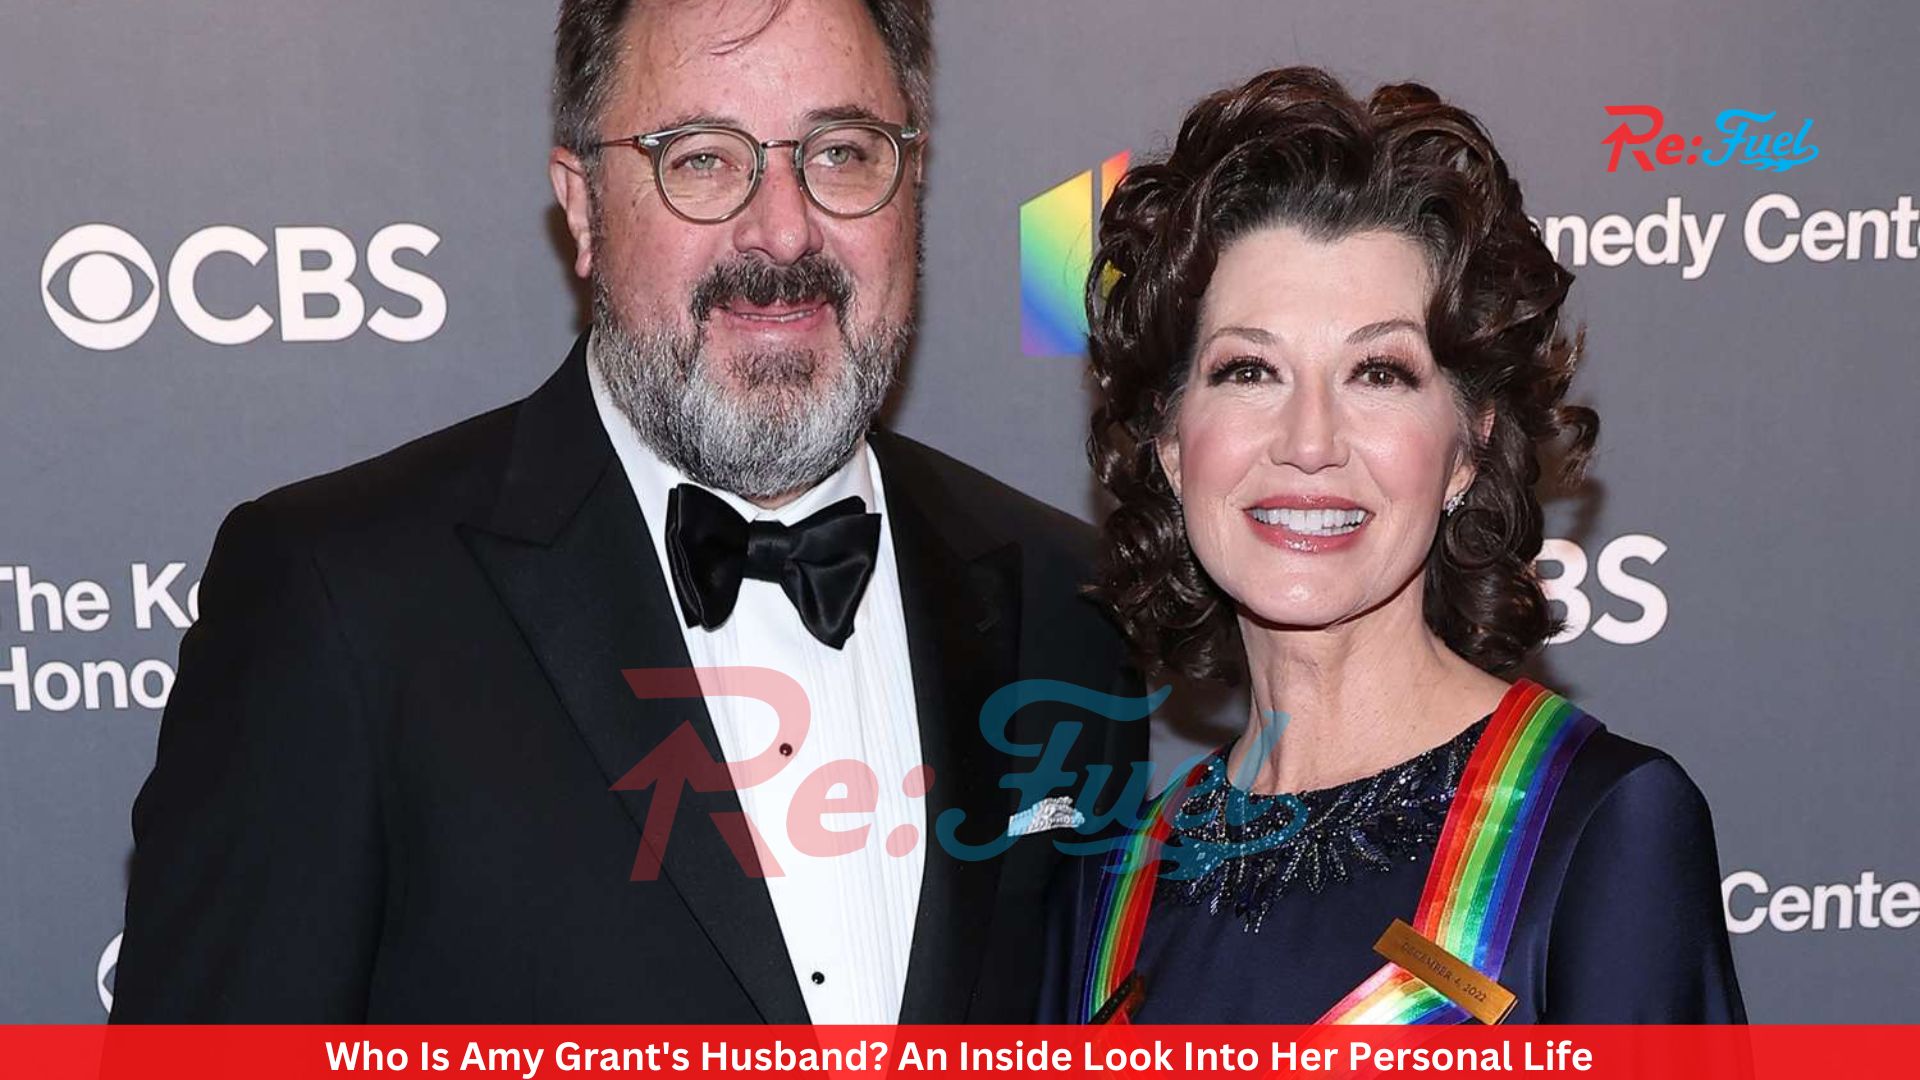 Who Is Amy Grant's Husband? An Inside Look Into Her Personal Life